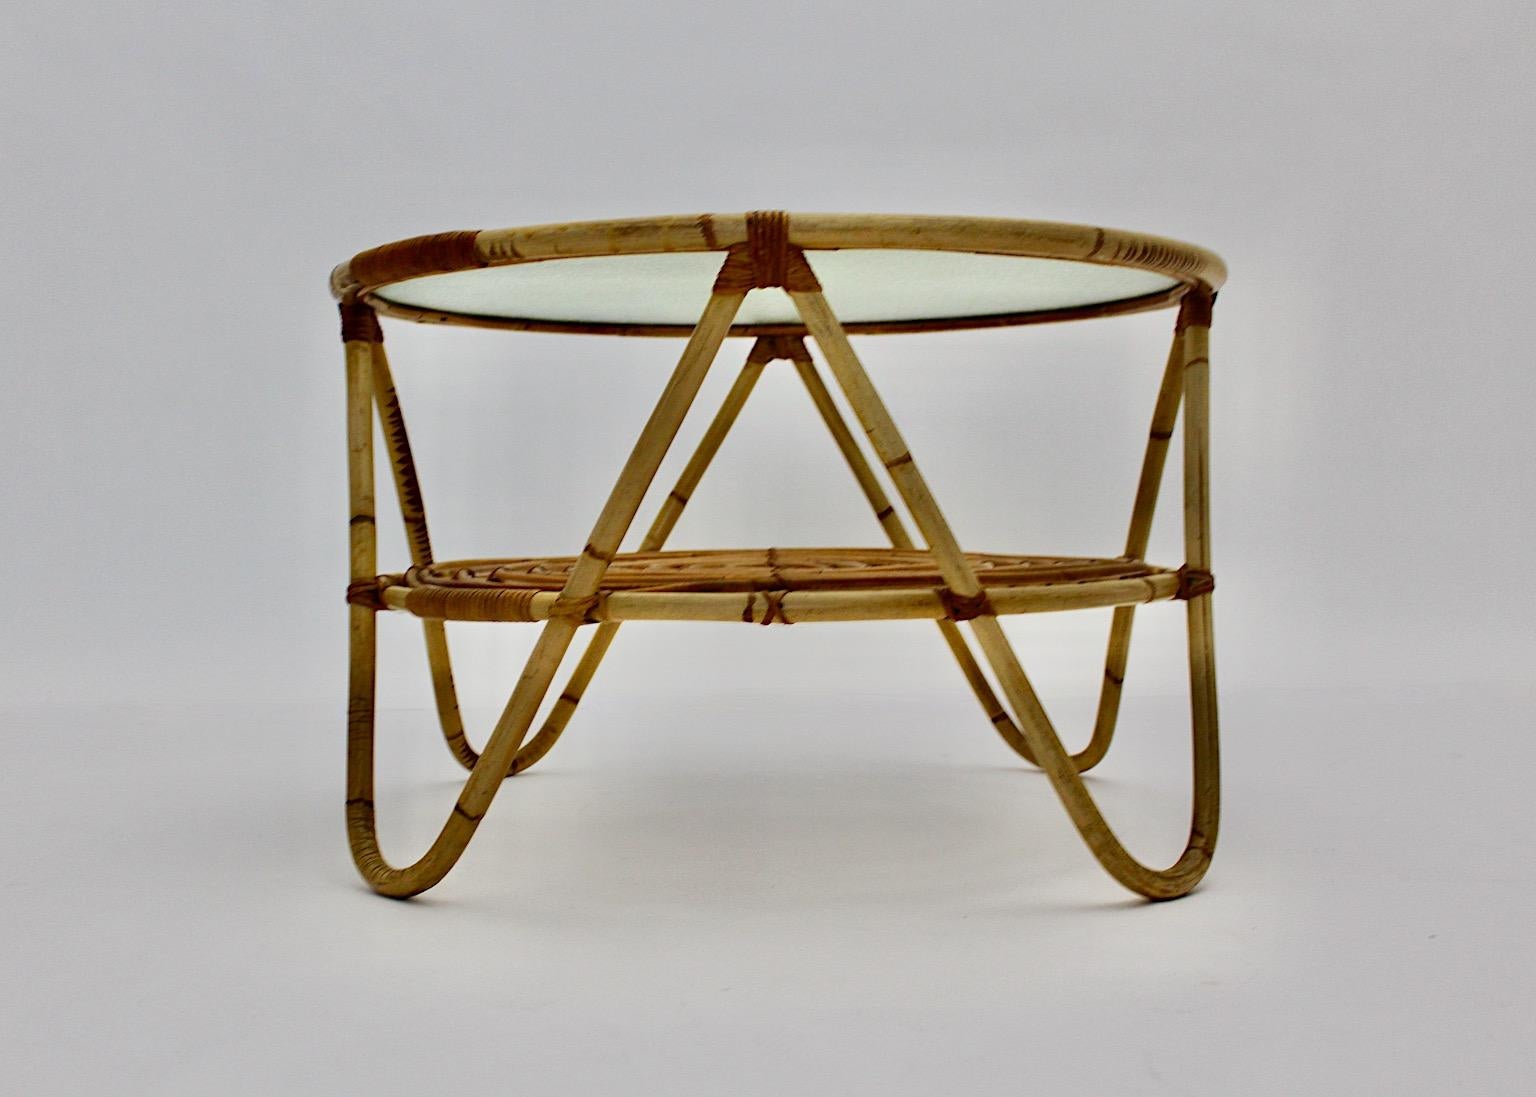 Mid-Century Modern organic vintage coffee table or sofa table from rattan and clear glass top attributed to Tito Agnoli, 1960s Italy.
A beautiful coffee table of sofa table in circular shape with two tiers, a clear frosted glass top and beautiful